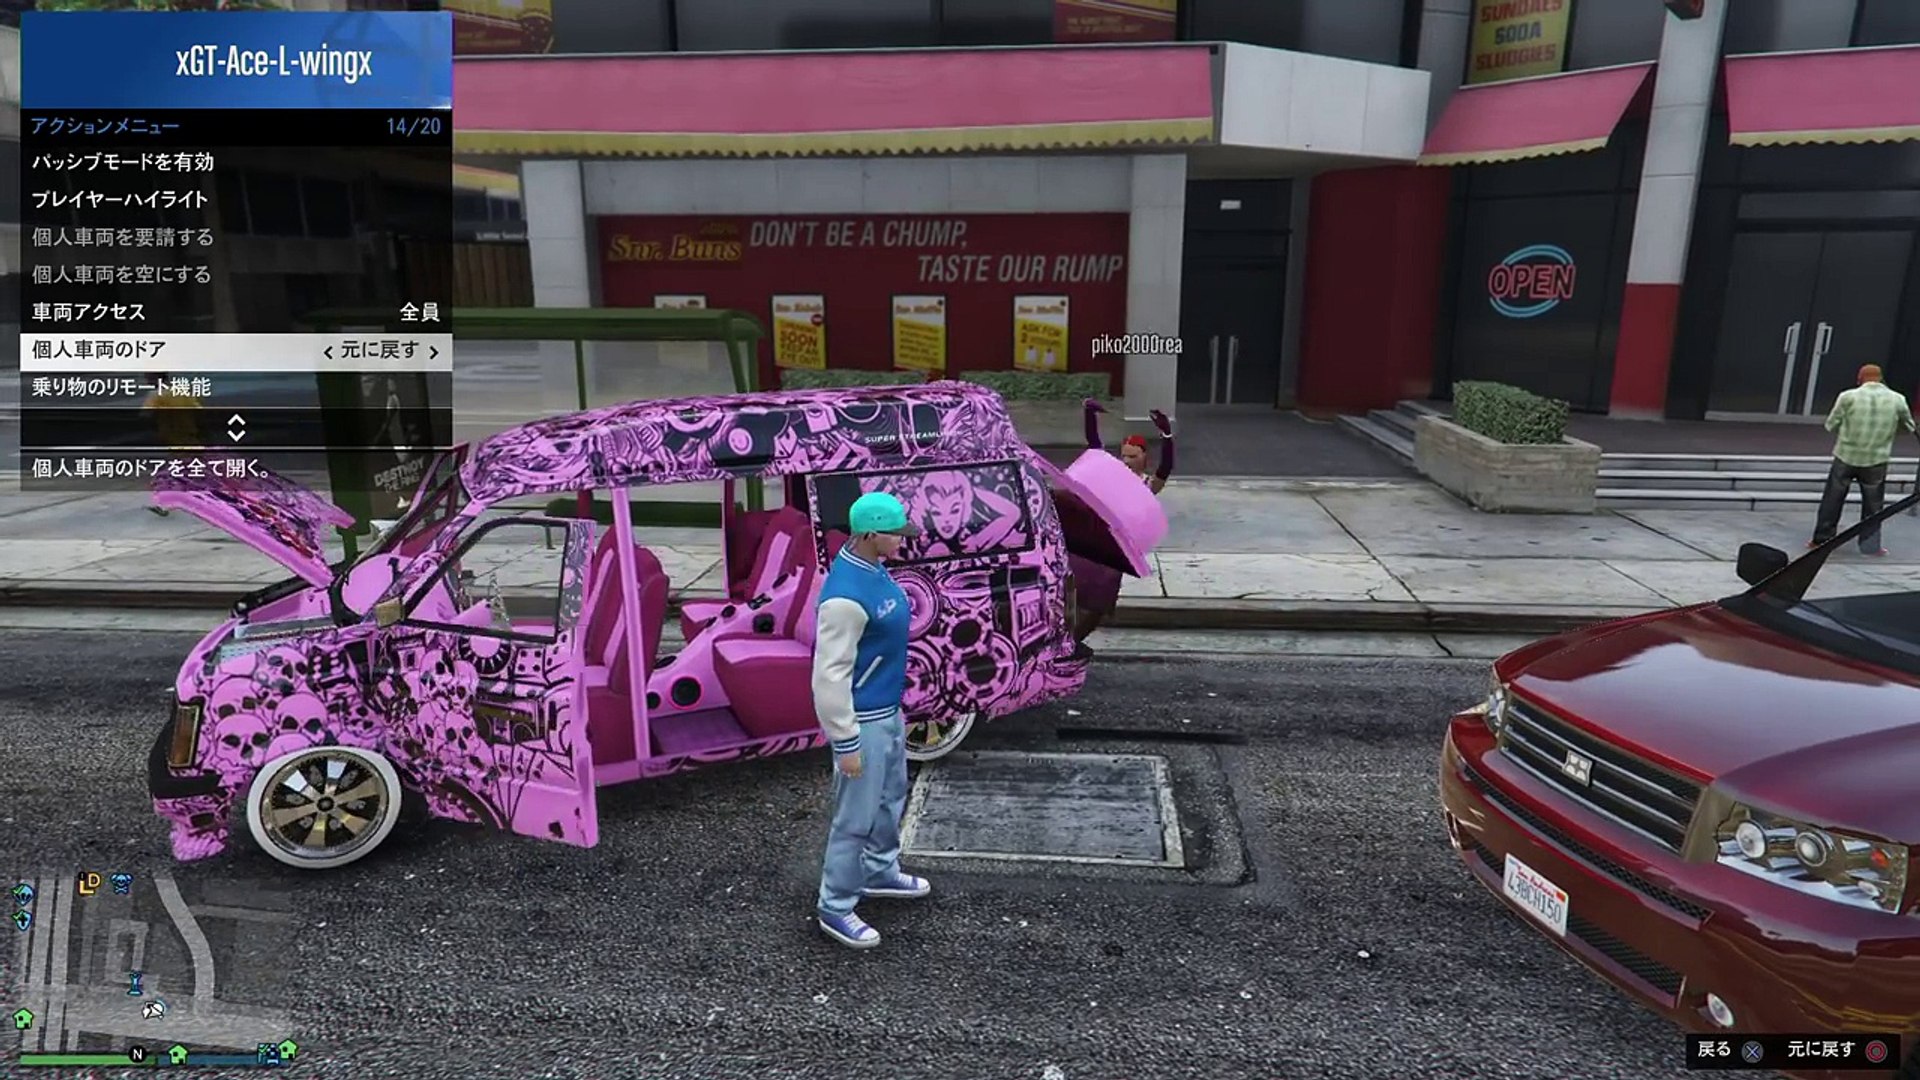 Gta5 Online Funny Montage Lowrider Hydraulics Bloopers ハイドロの面白事故集 Video Dailymotion